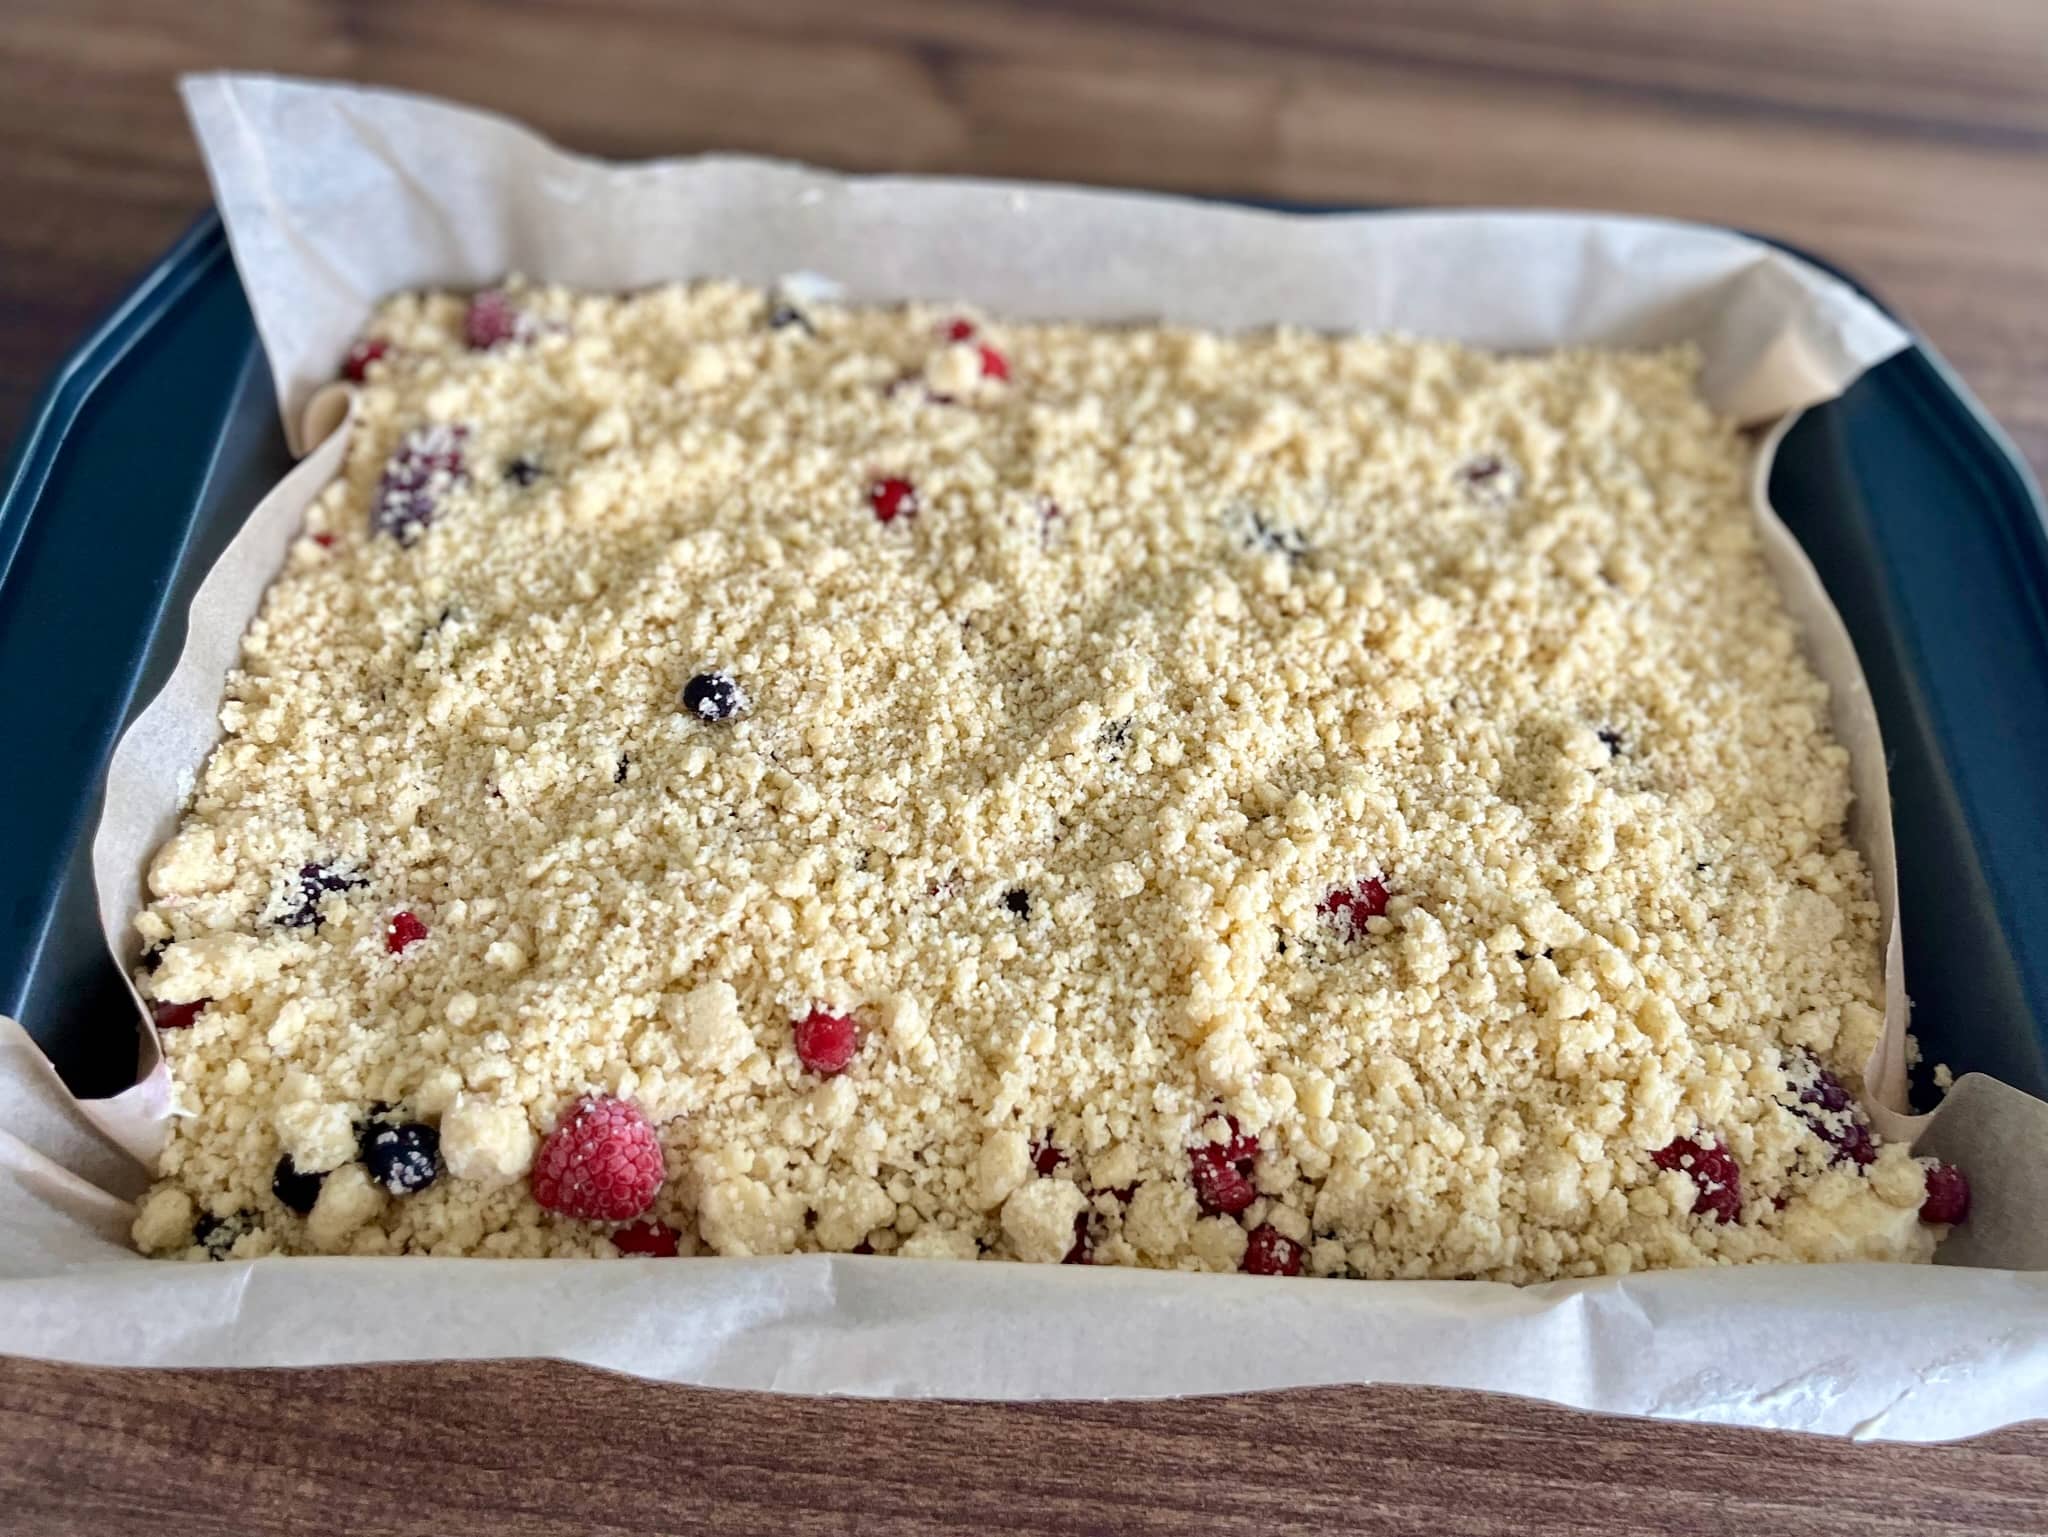 The prepared summer berry crumble cake is ready to be baked